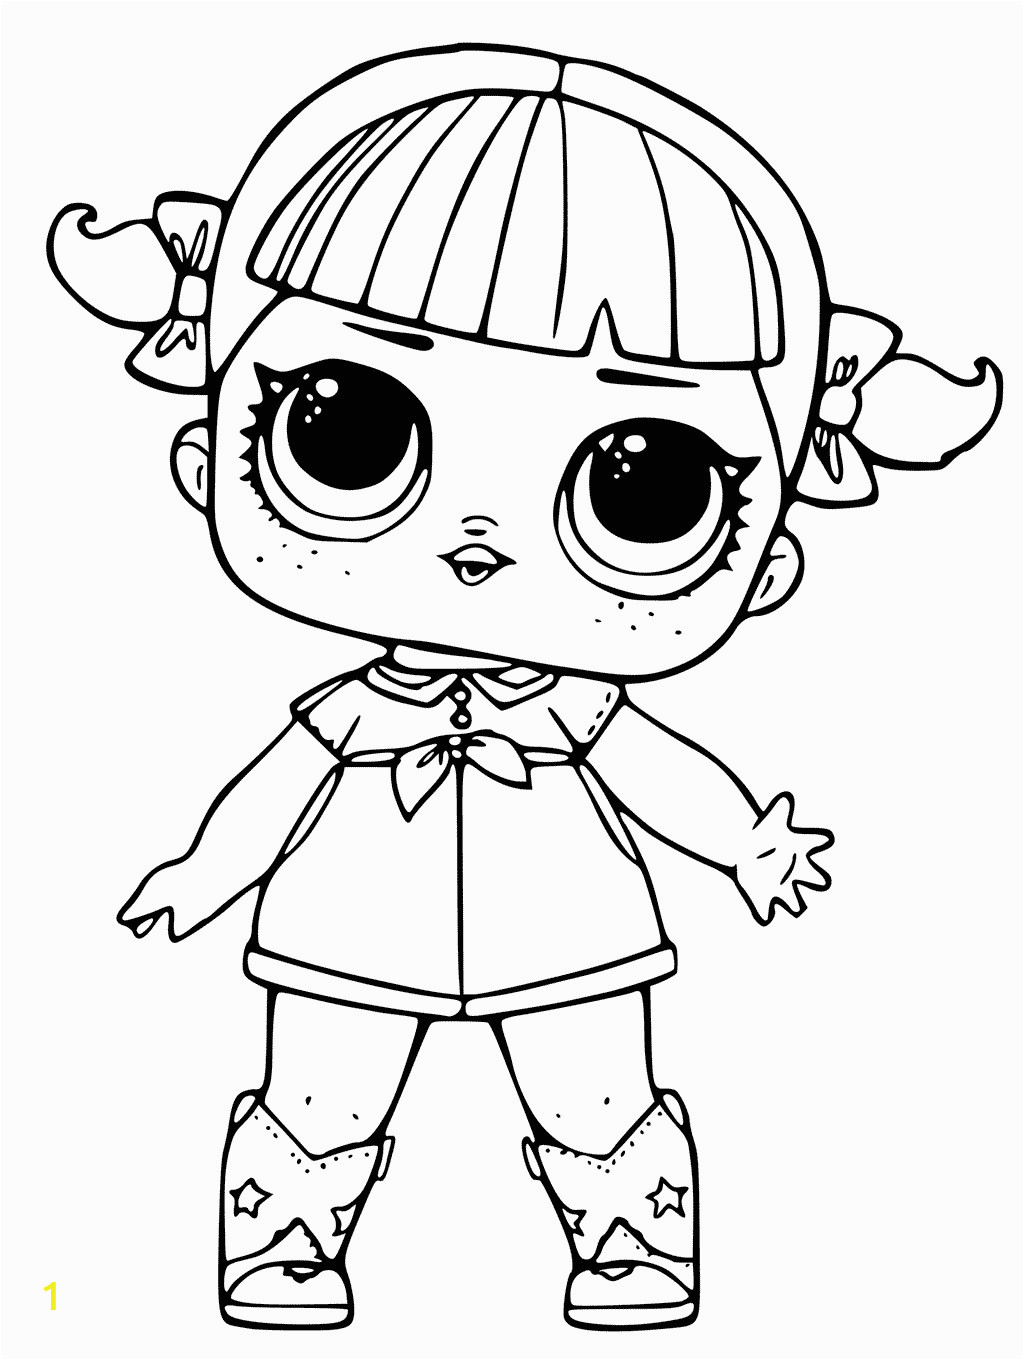 coloring pages of durprise dolls